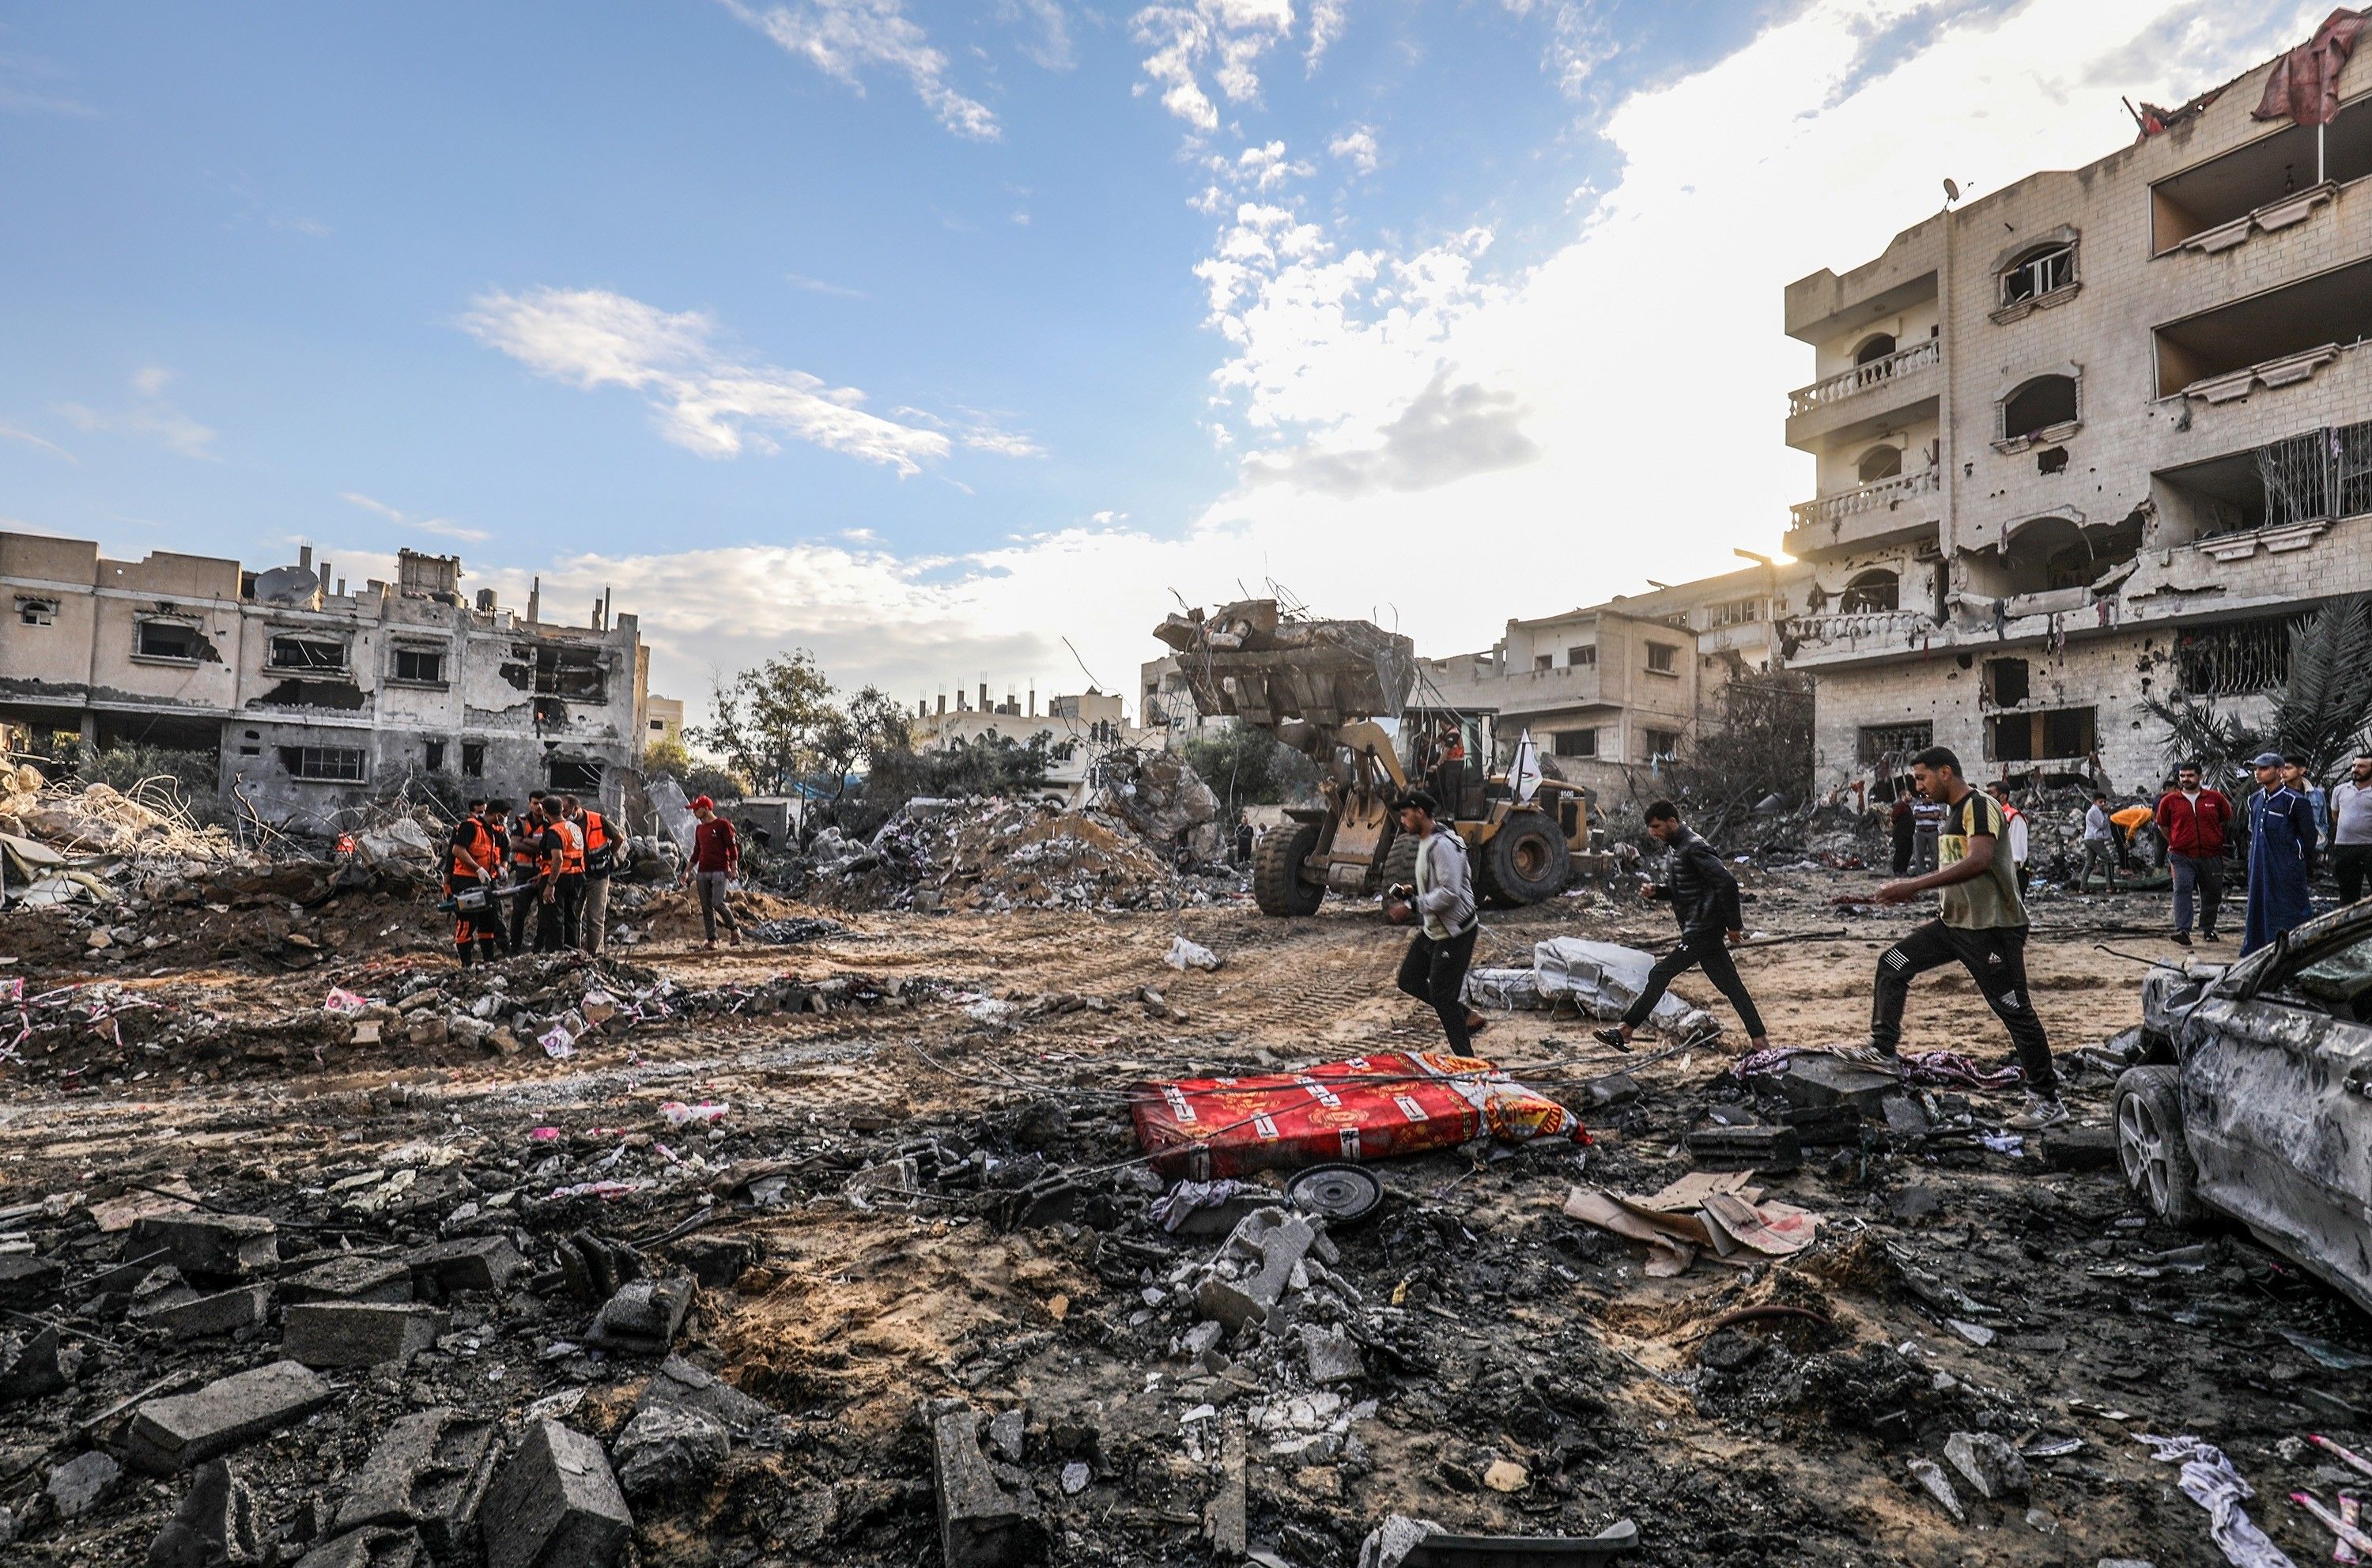 Will the human rights movement survive the Gaza war?